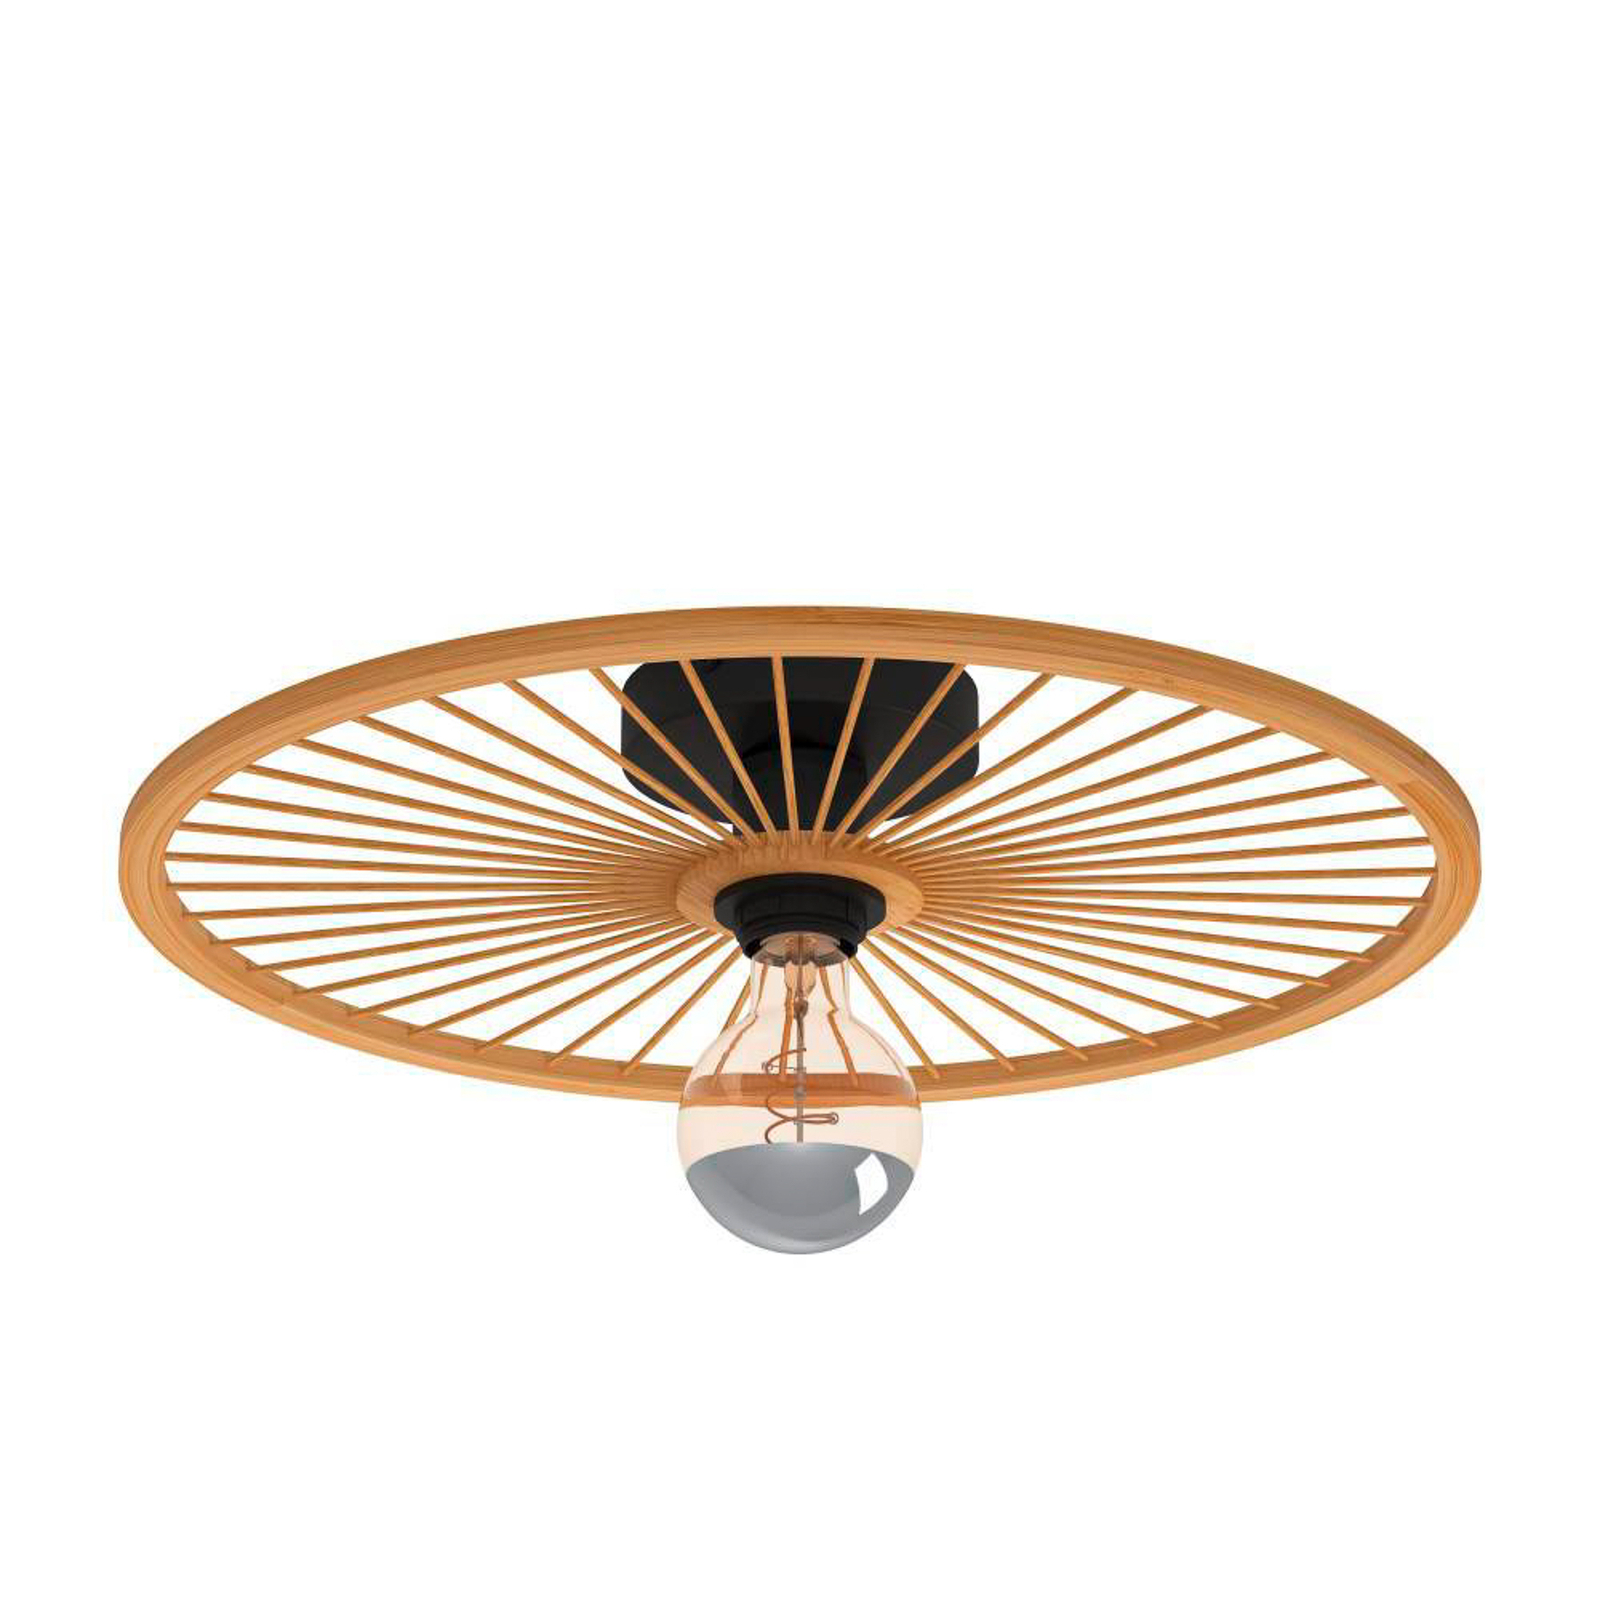 EGLO Leominster ceiling lamp round wood lampshade